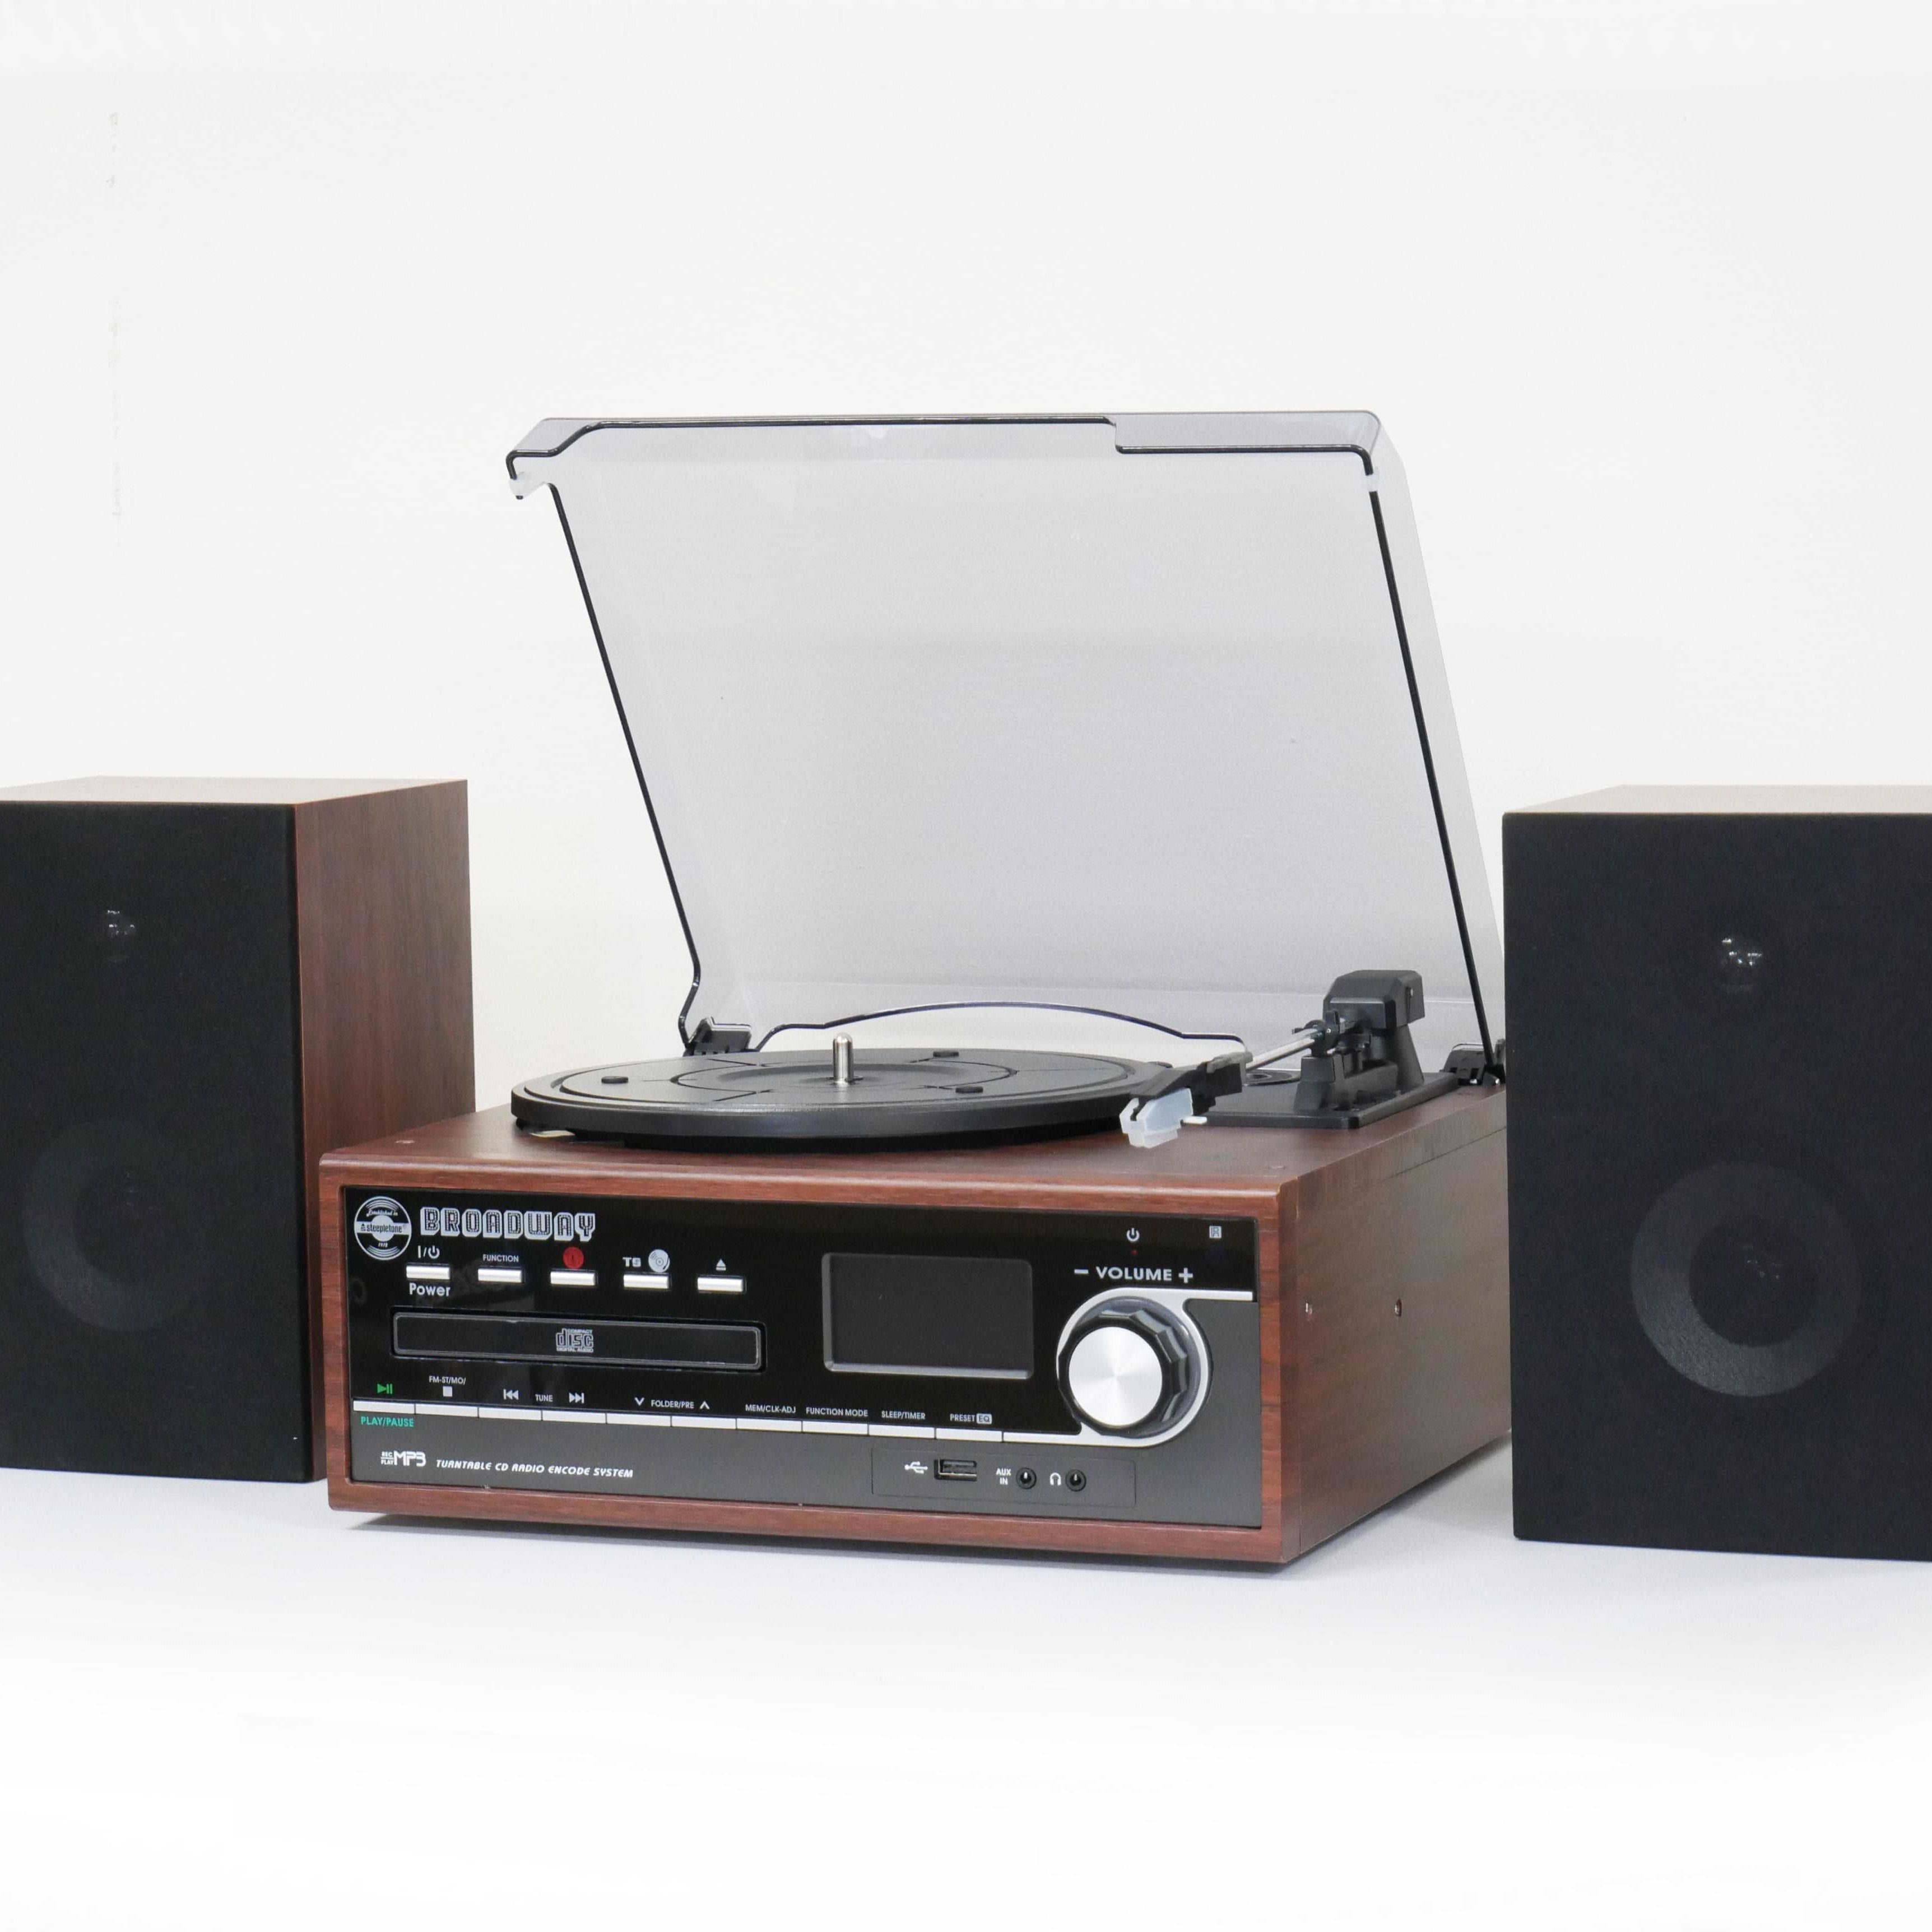 BROADWAY 5–in–1 Music Centre with MP3 Recording and 3 Speed turntable, CD player and Bluetooth